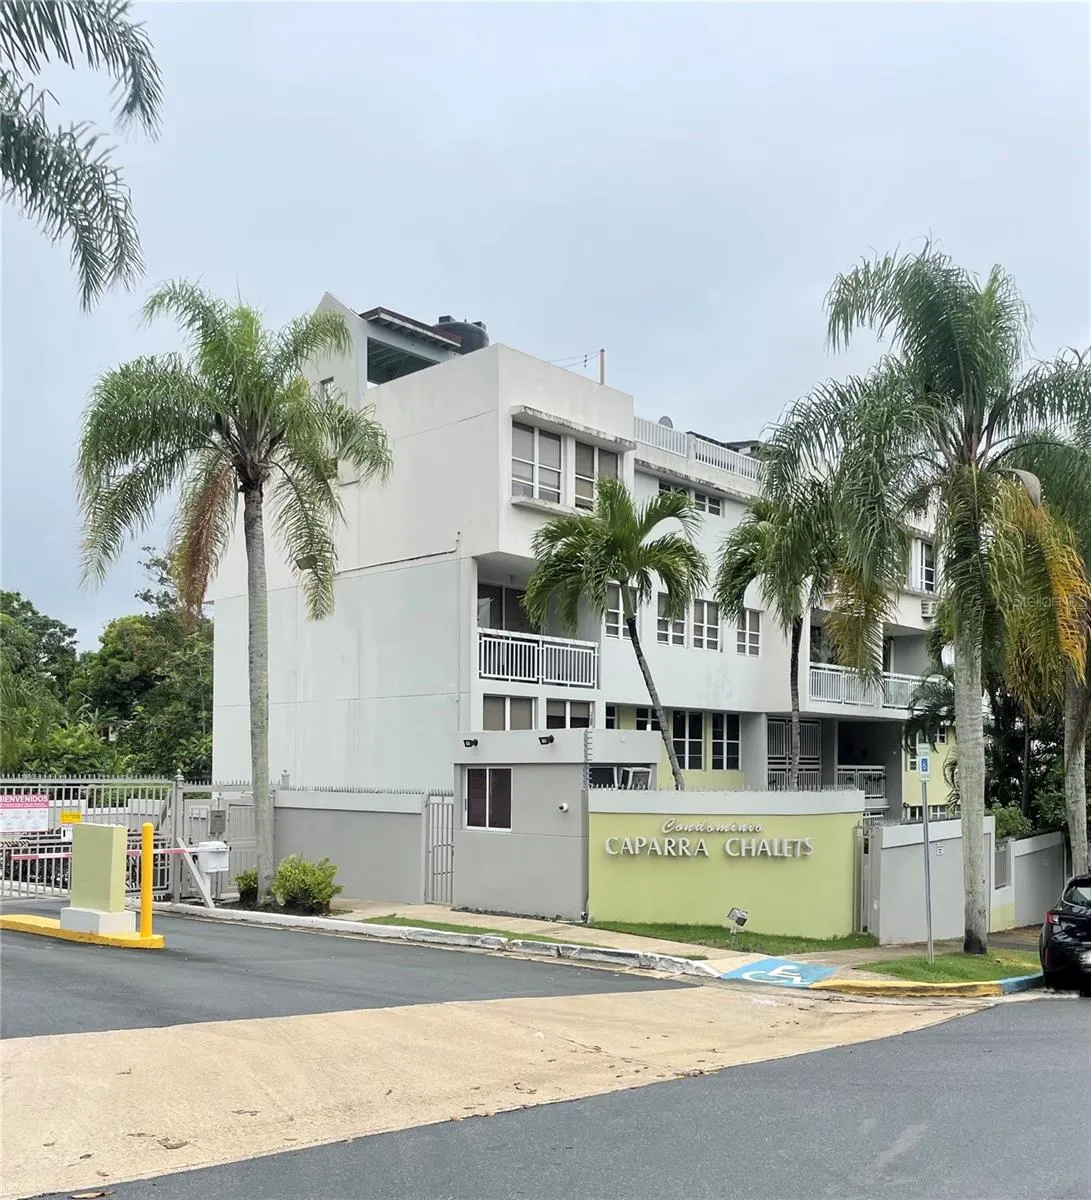 Cond. Caparra Chalets 49 CALLE 8, Guaynabo, Puerto Rico 00966, 3 Bedrooms Bedrooms, ,3 BathroomsBathrooms,Residential Lease,For Rent,CAPARRA CHALETS,49 CALLE 8,PR9105643